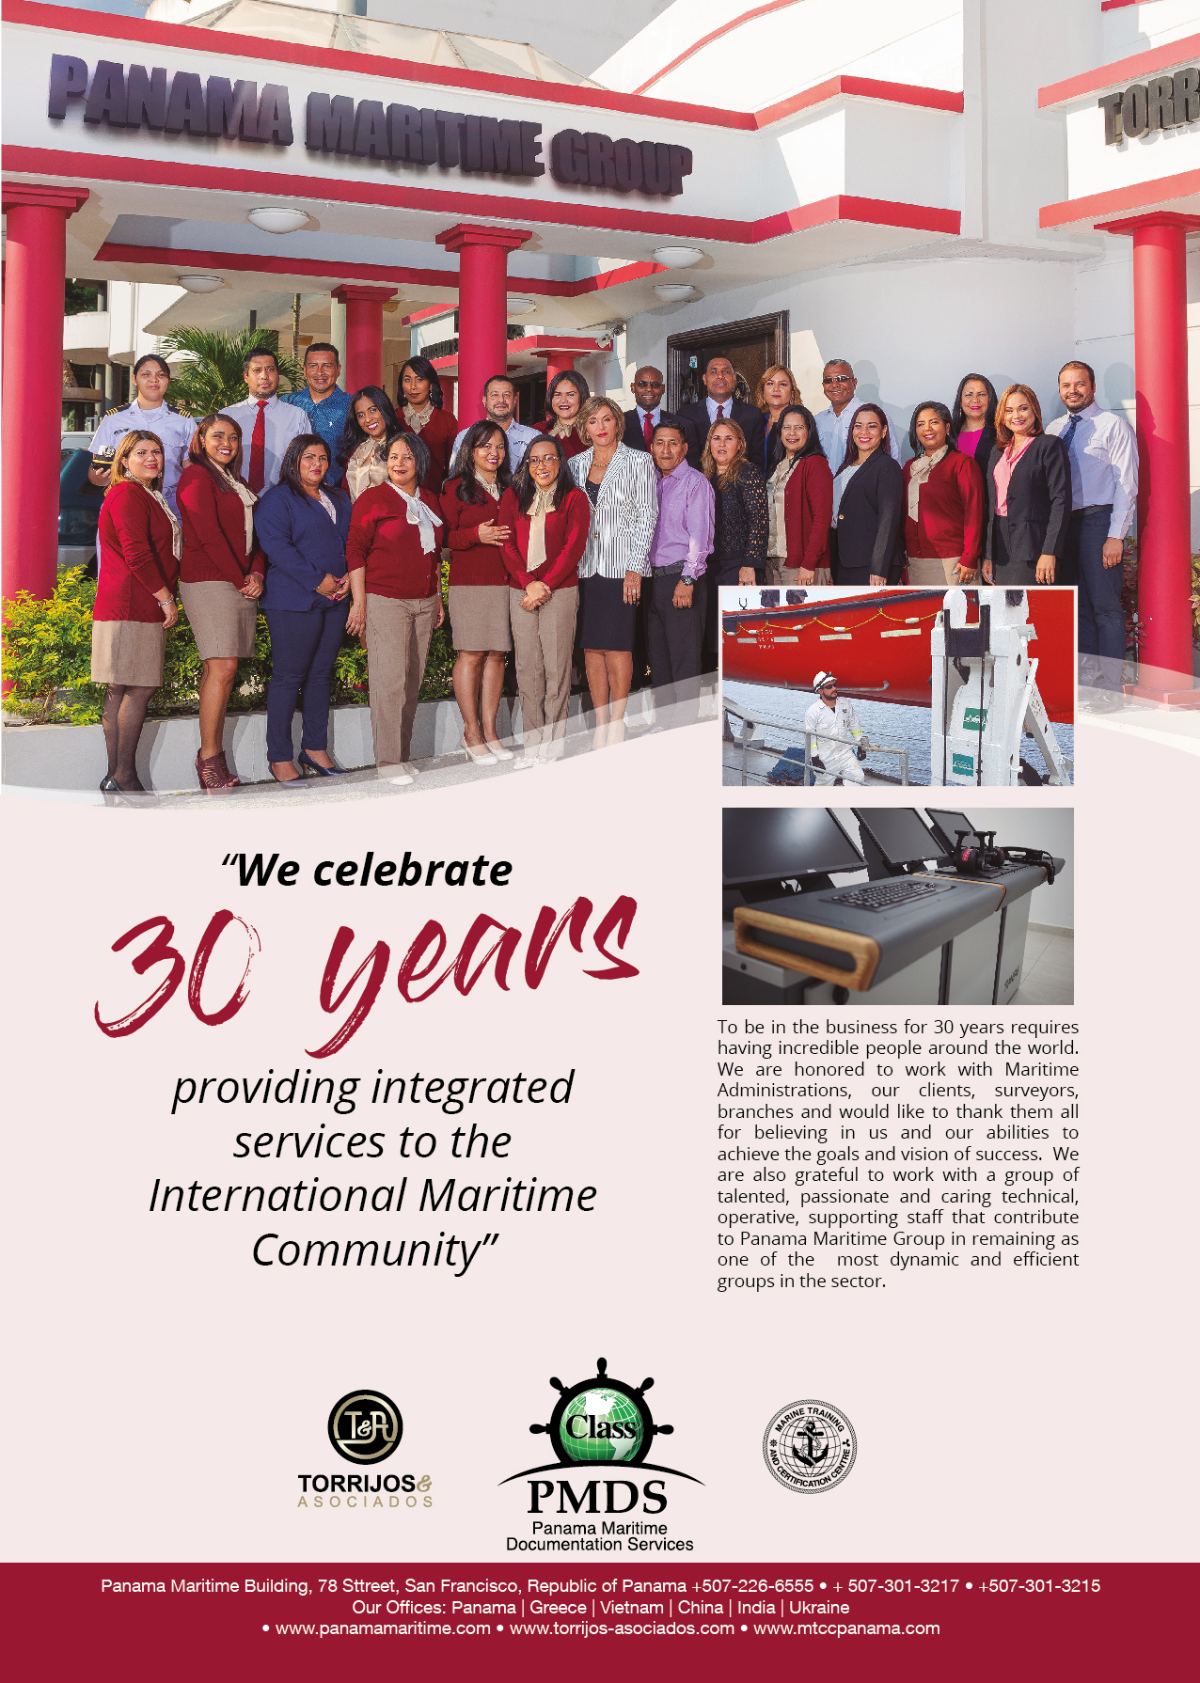 We Celebrate 30 Years providing integrated services to the International Maritime Community